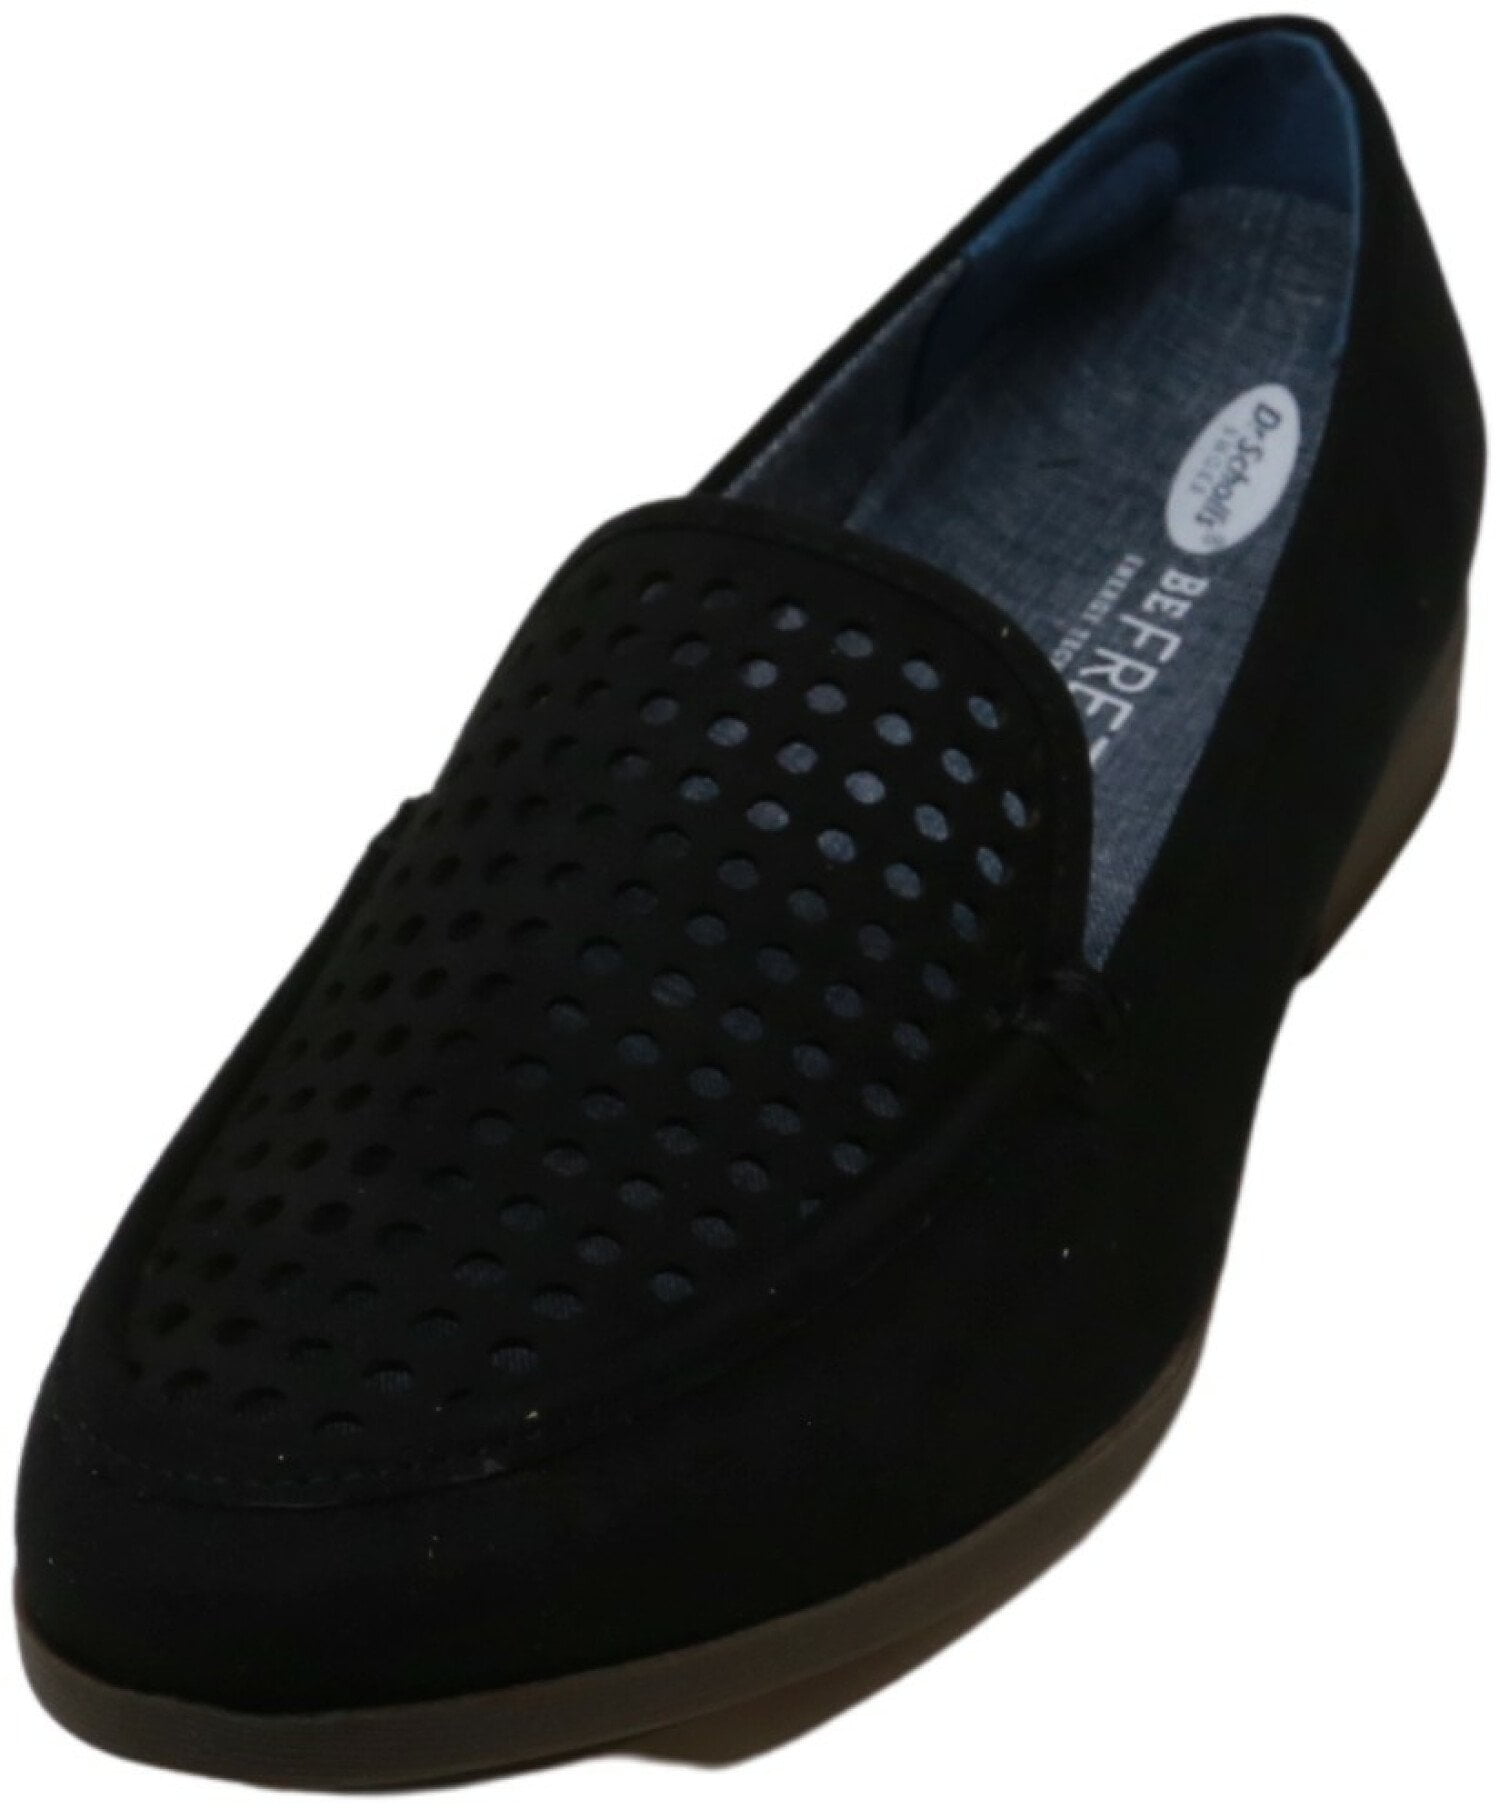 Dr. Scholls Women's Excite Chop Black Fabric Loafers & Slip-On - 7M ...